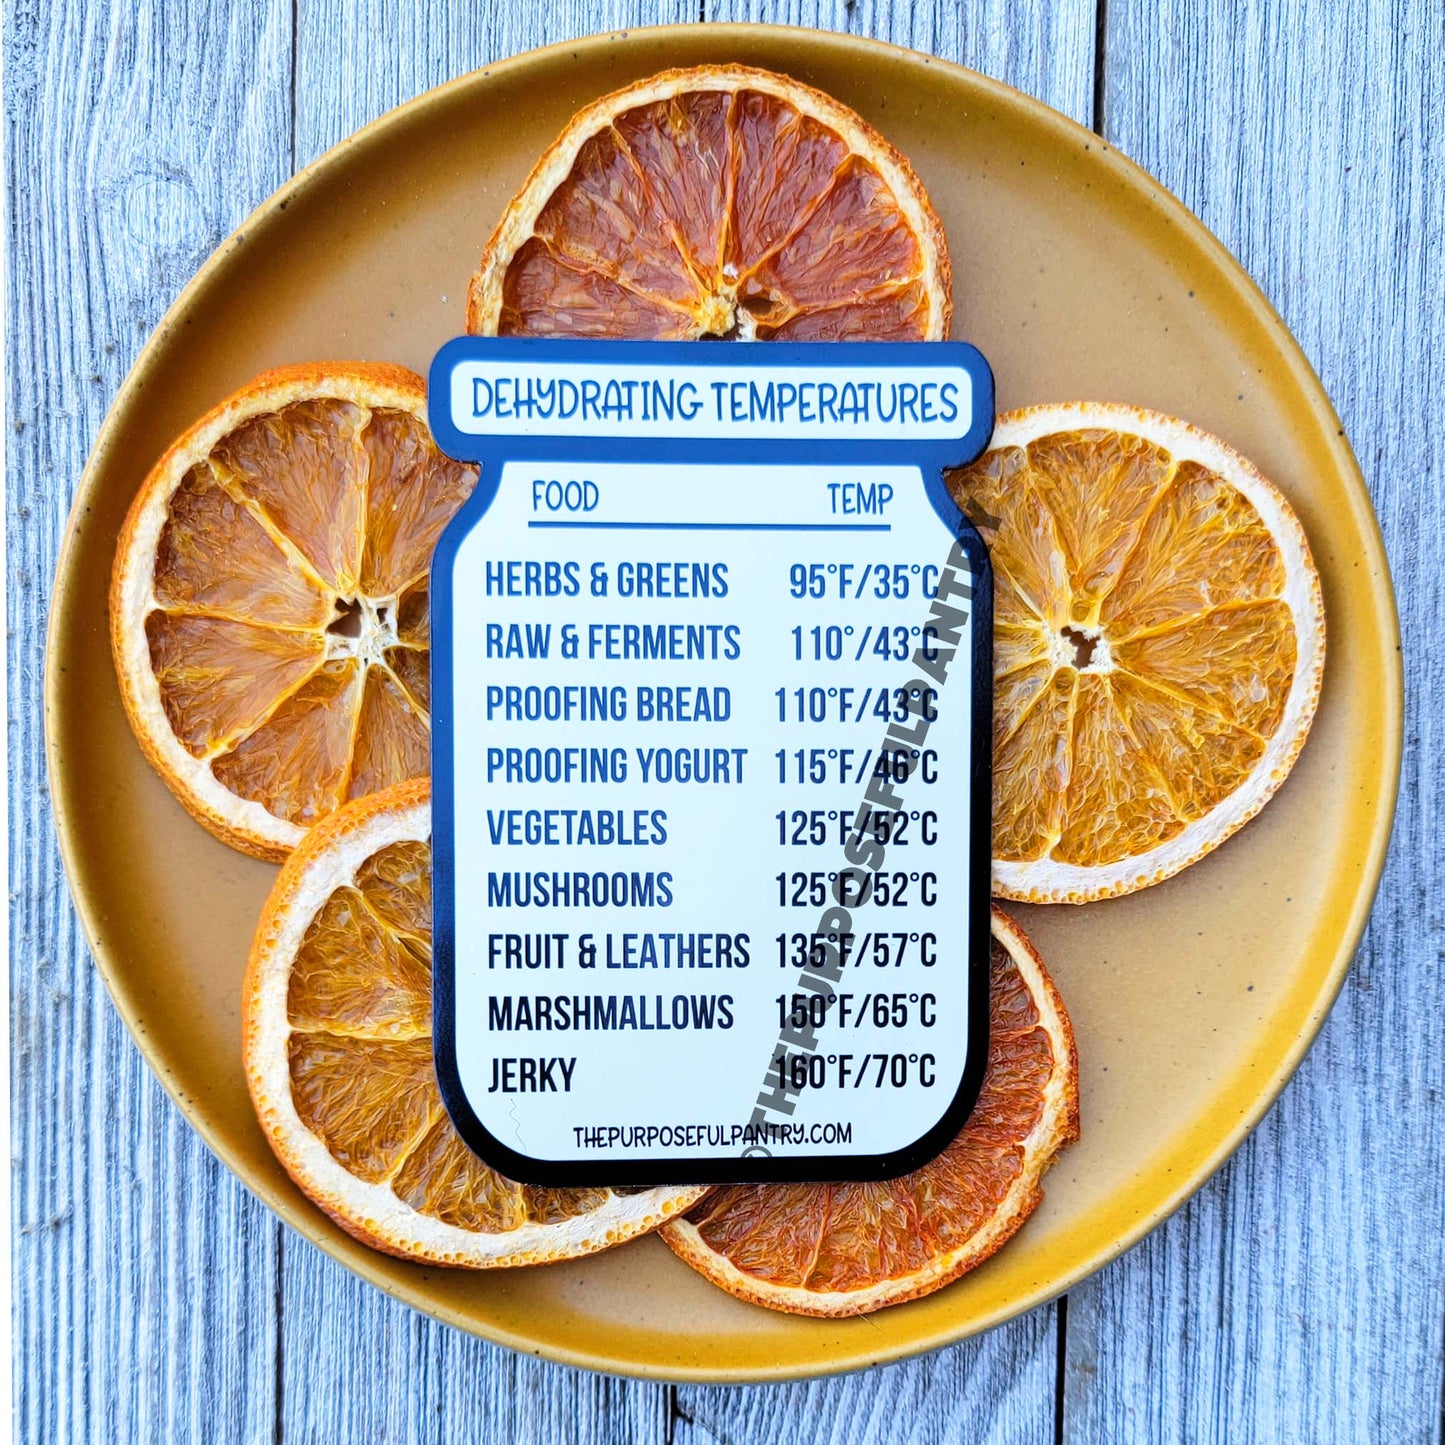 A plate of orange slices with The Purposeful Pantry's Dehydrating Temperature Guides & Checklist label on it.